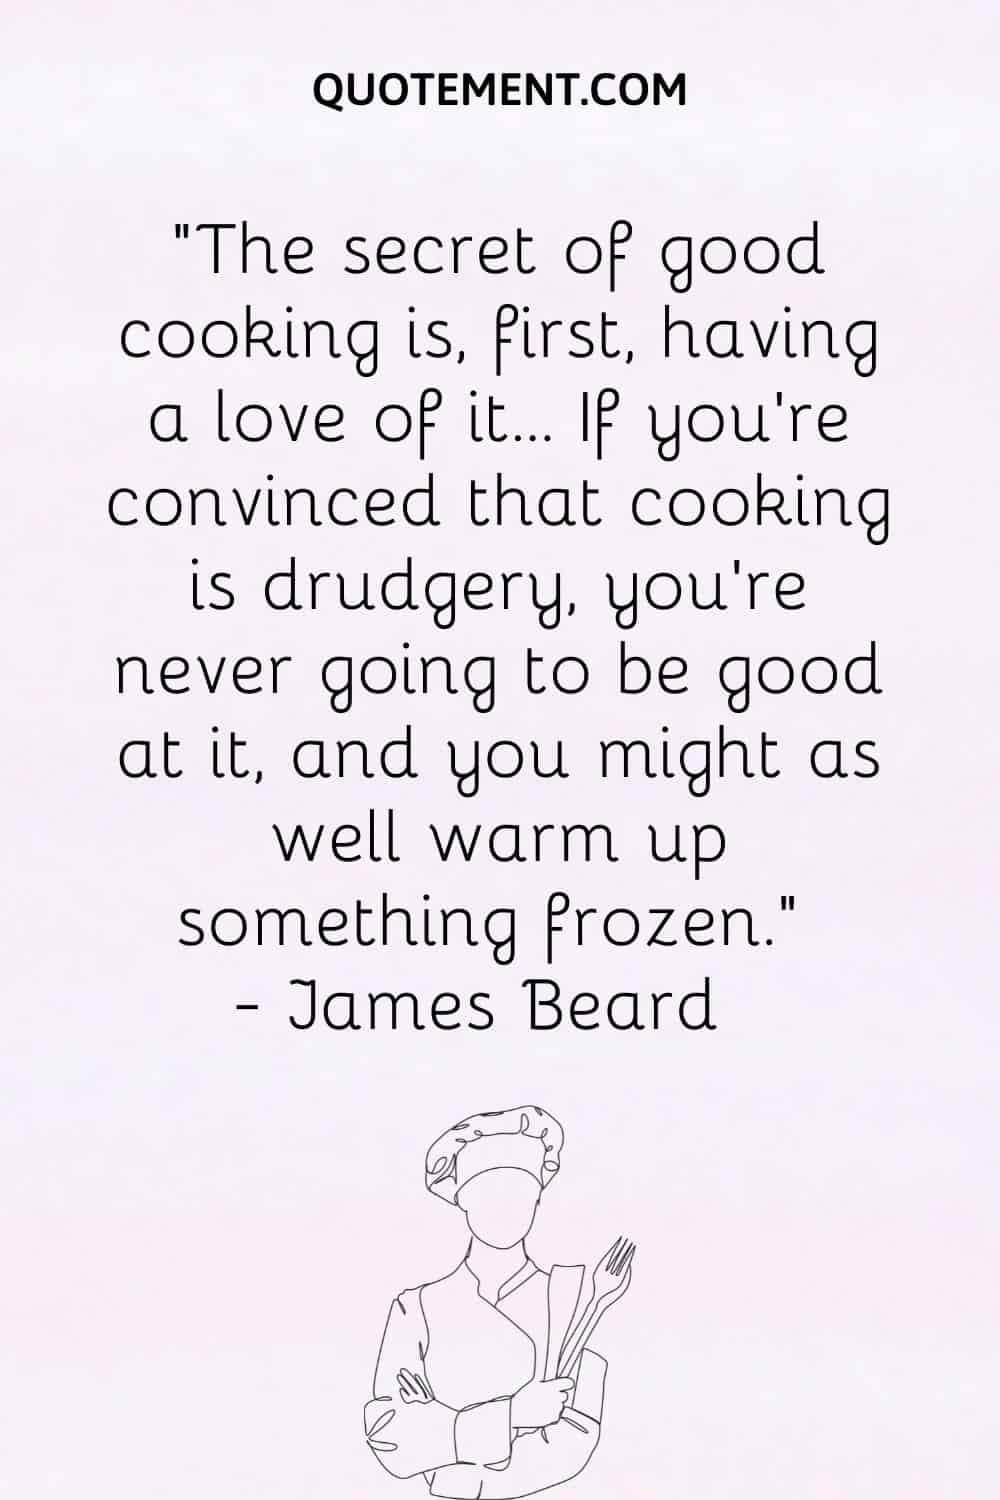 The secret of good cooking is, first, having a love of it